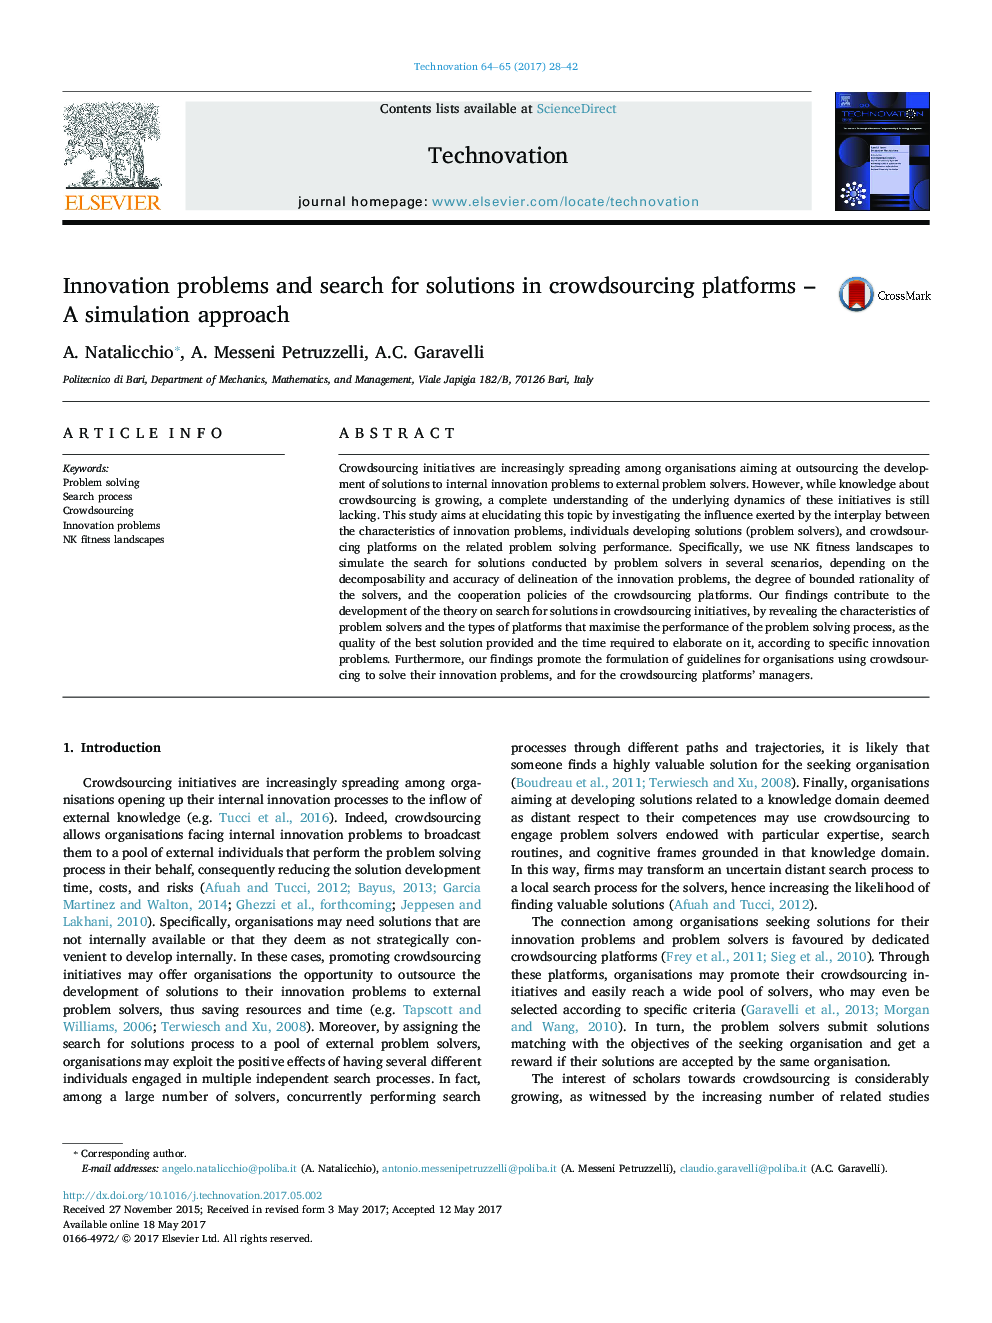 Innovation problems and search for solutions in crowdsourcing platforms - A simulation approach